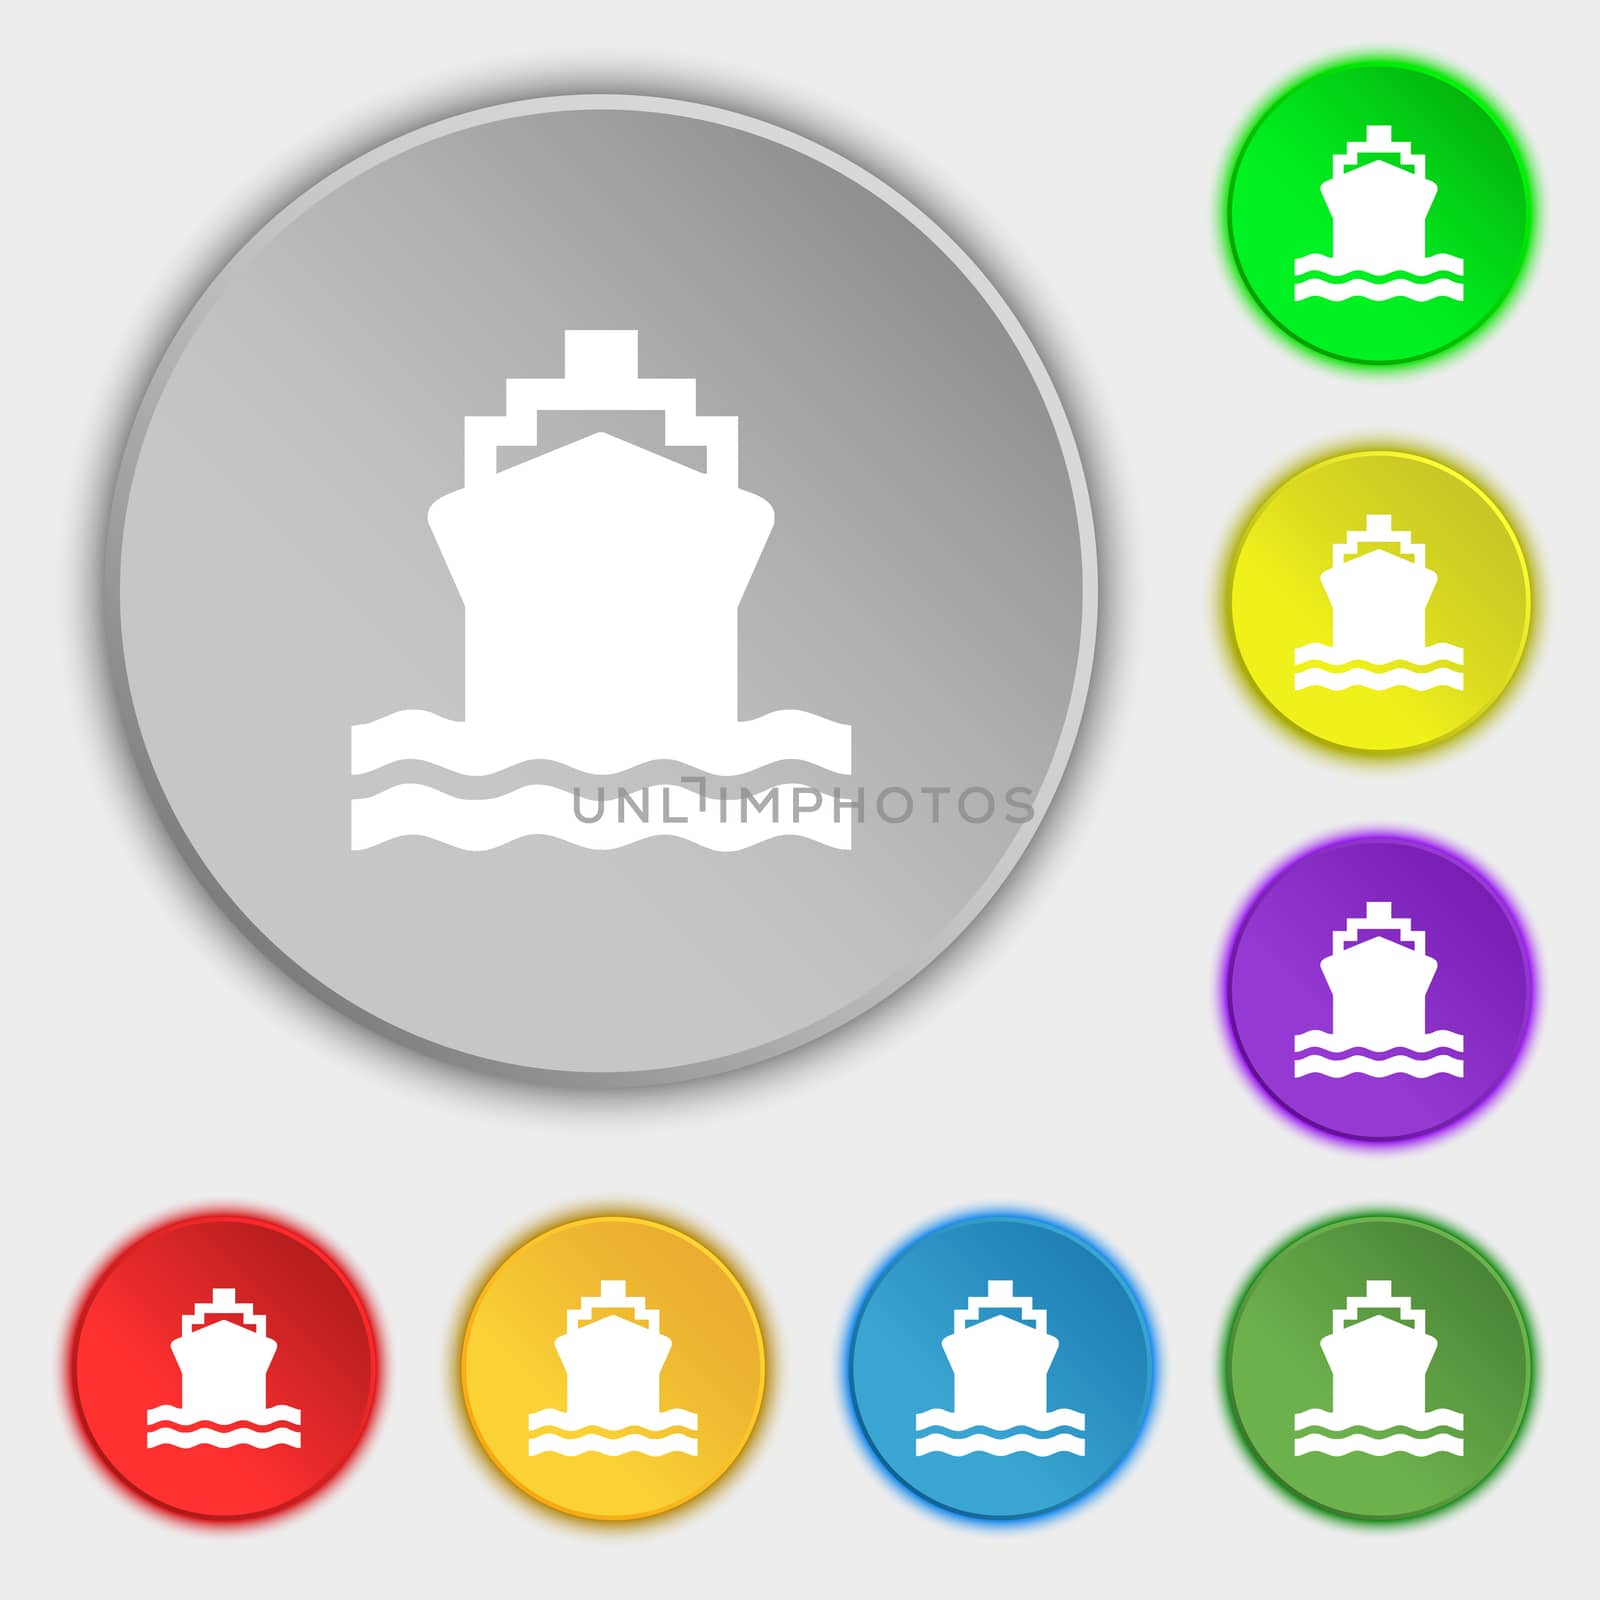 ship icon sign. Symbol on five flat buttons. illustration